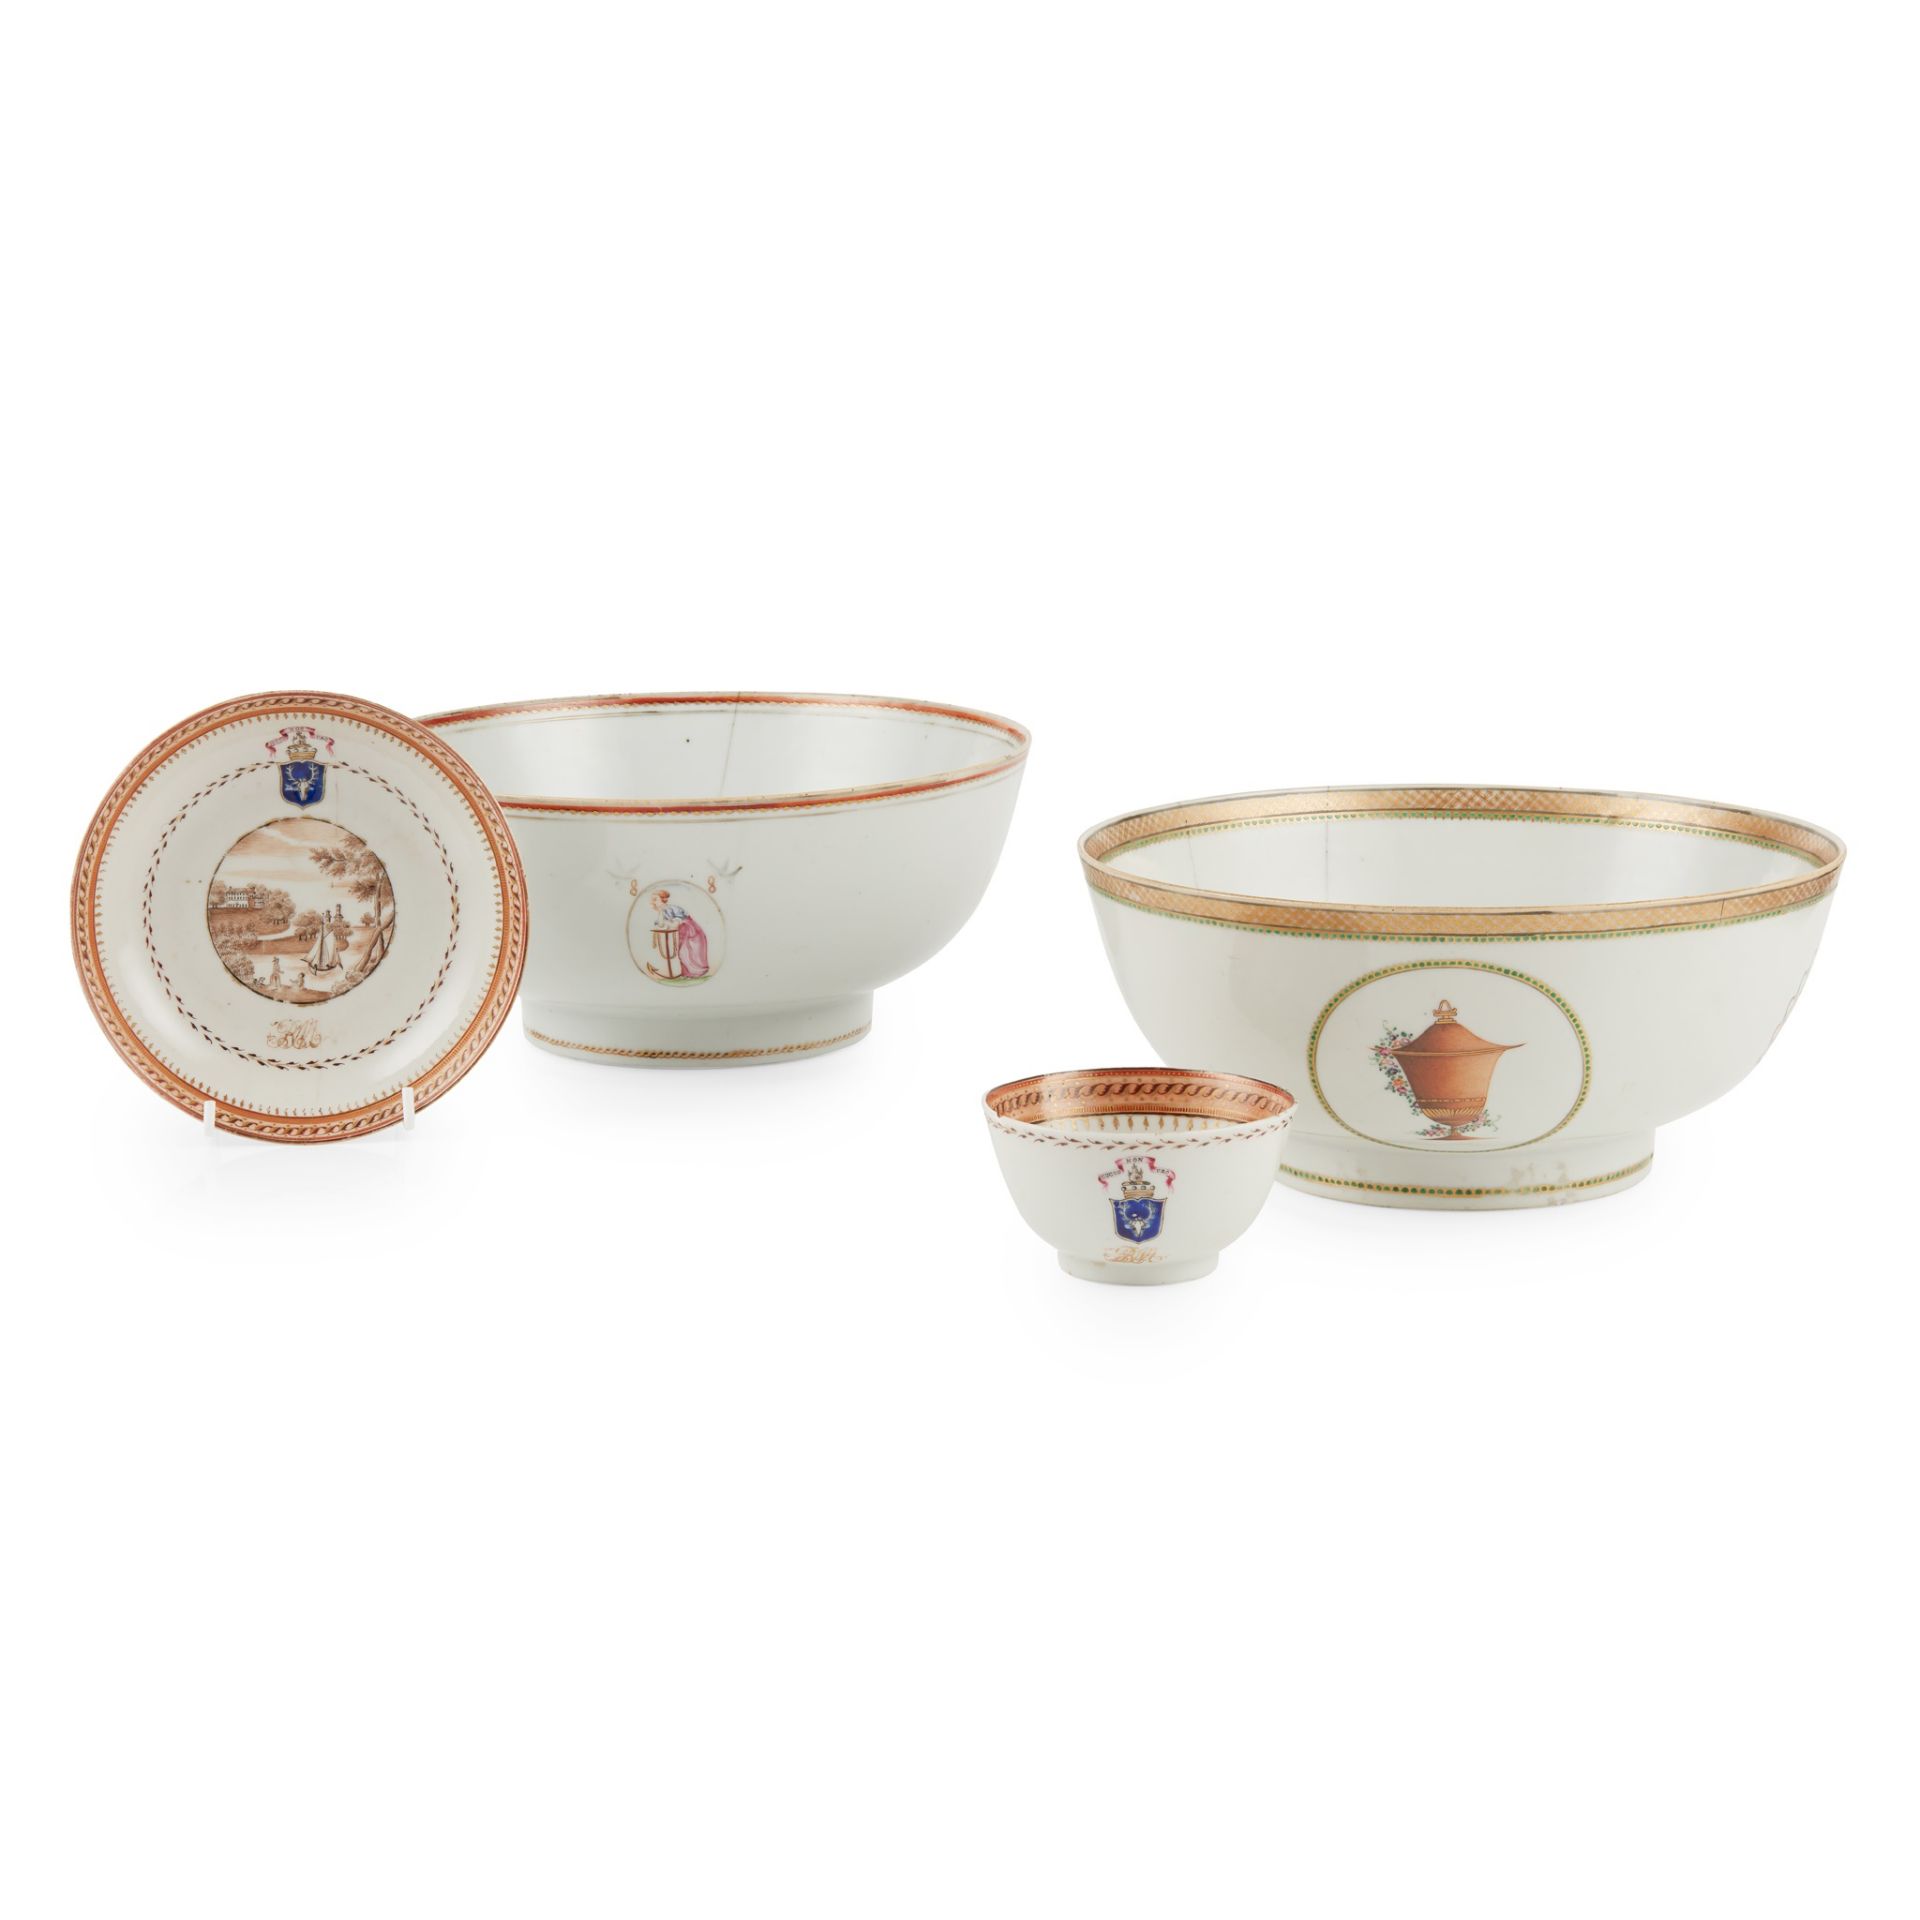 GROUP OF FOUR FAMILLE ROSE WARES QING DYNASTY, 18TH CENTURY